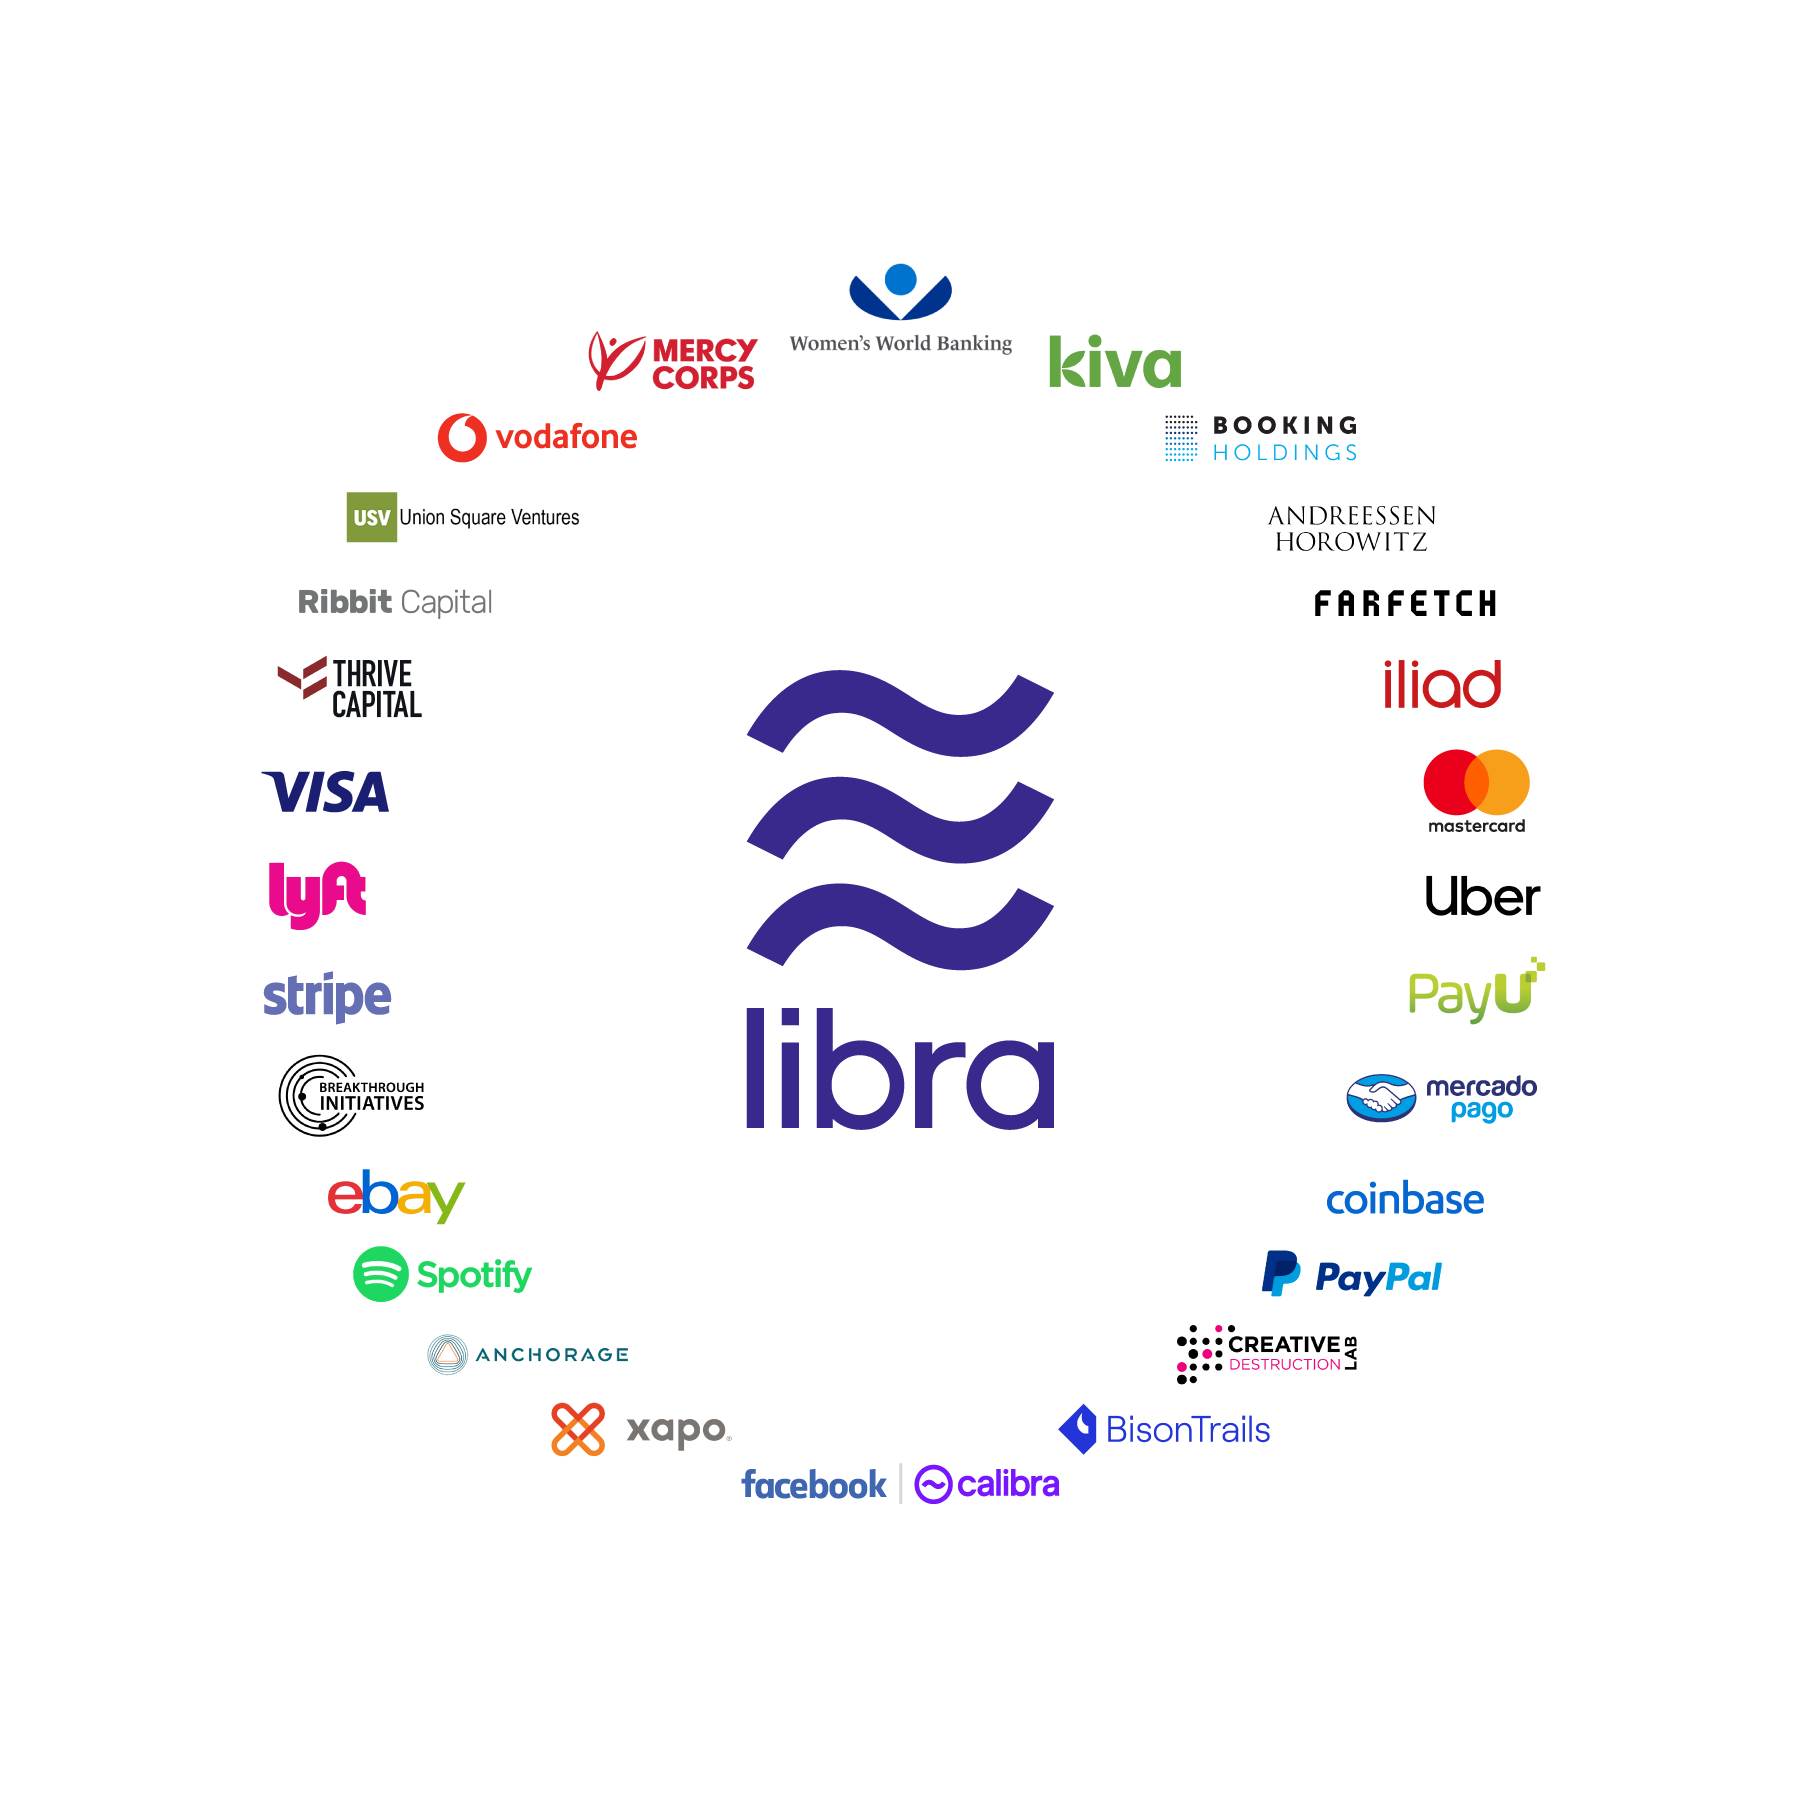 An infographic displaying the 28 logos of the Libra Association's founding partners.